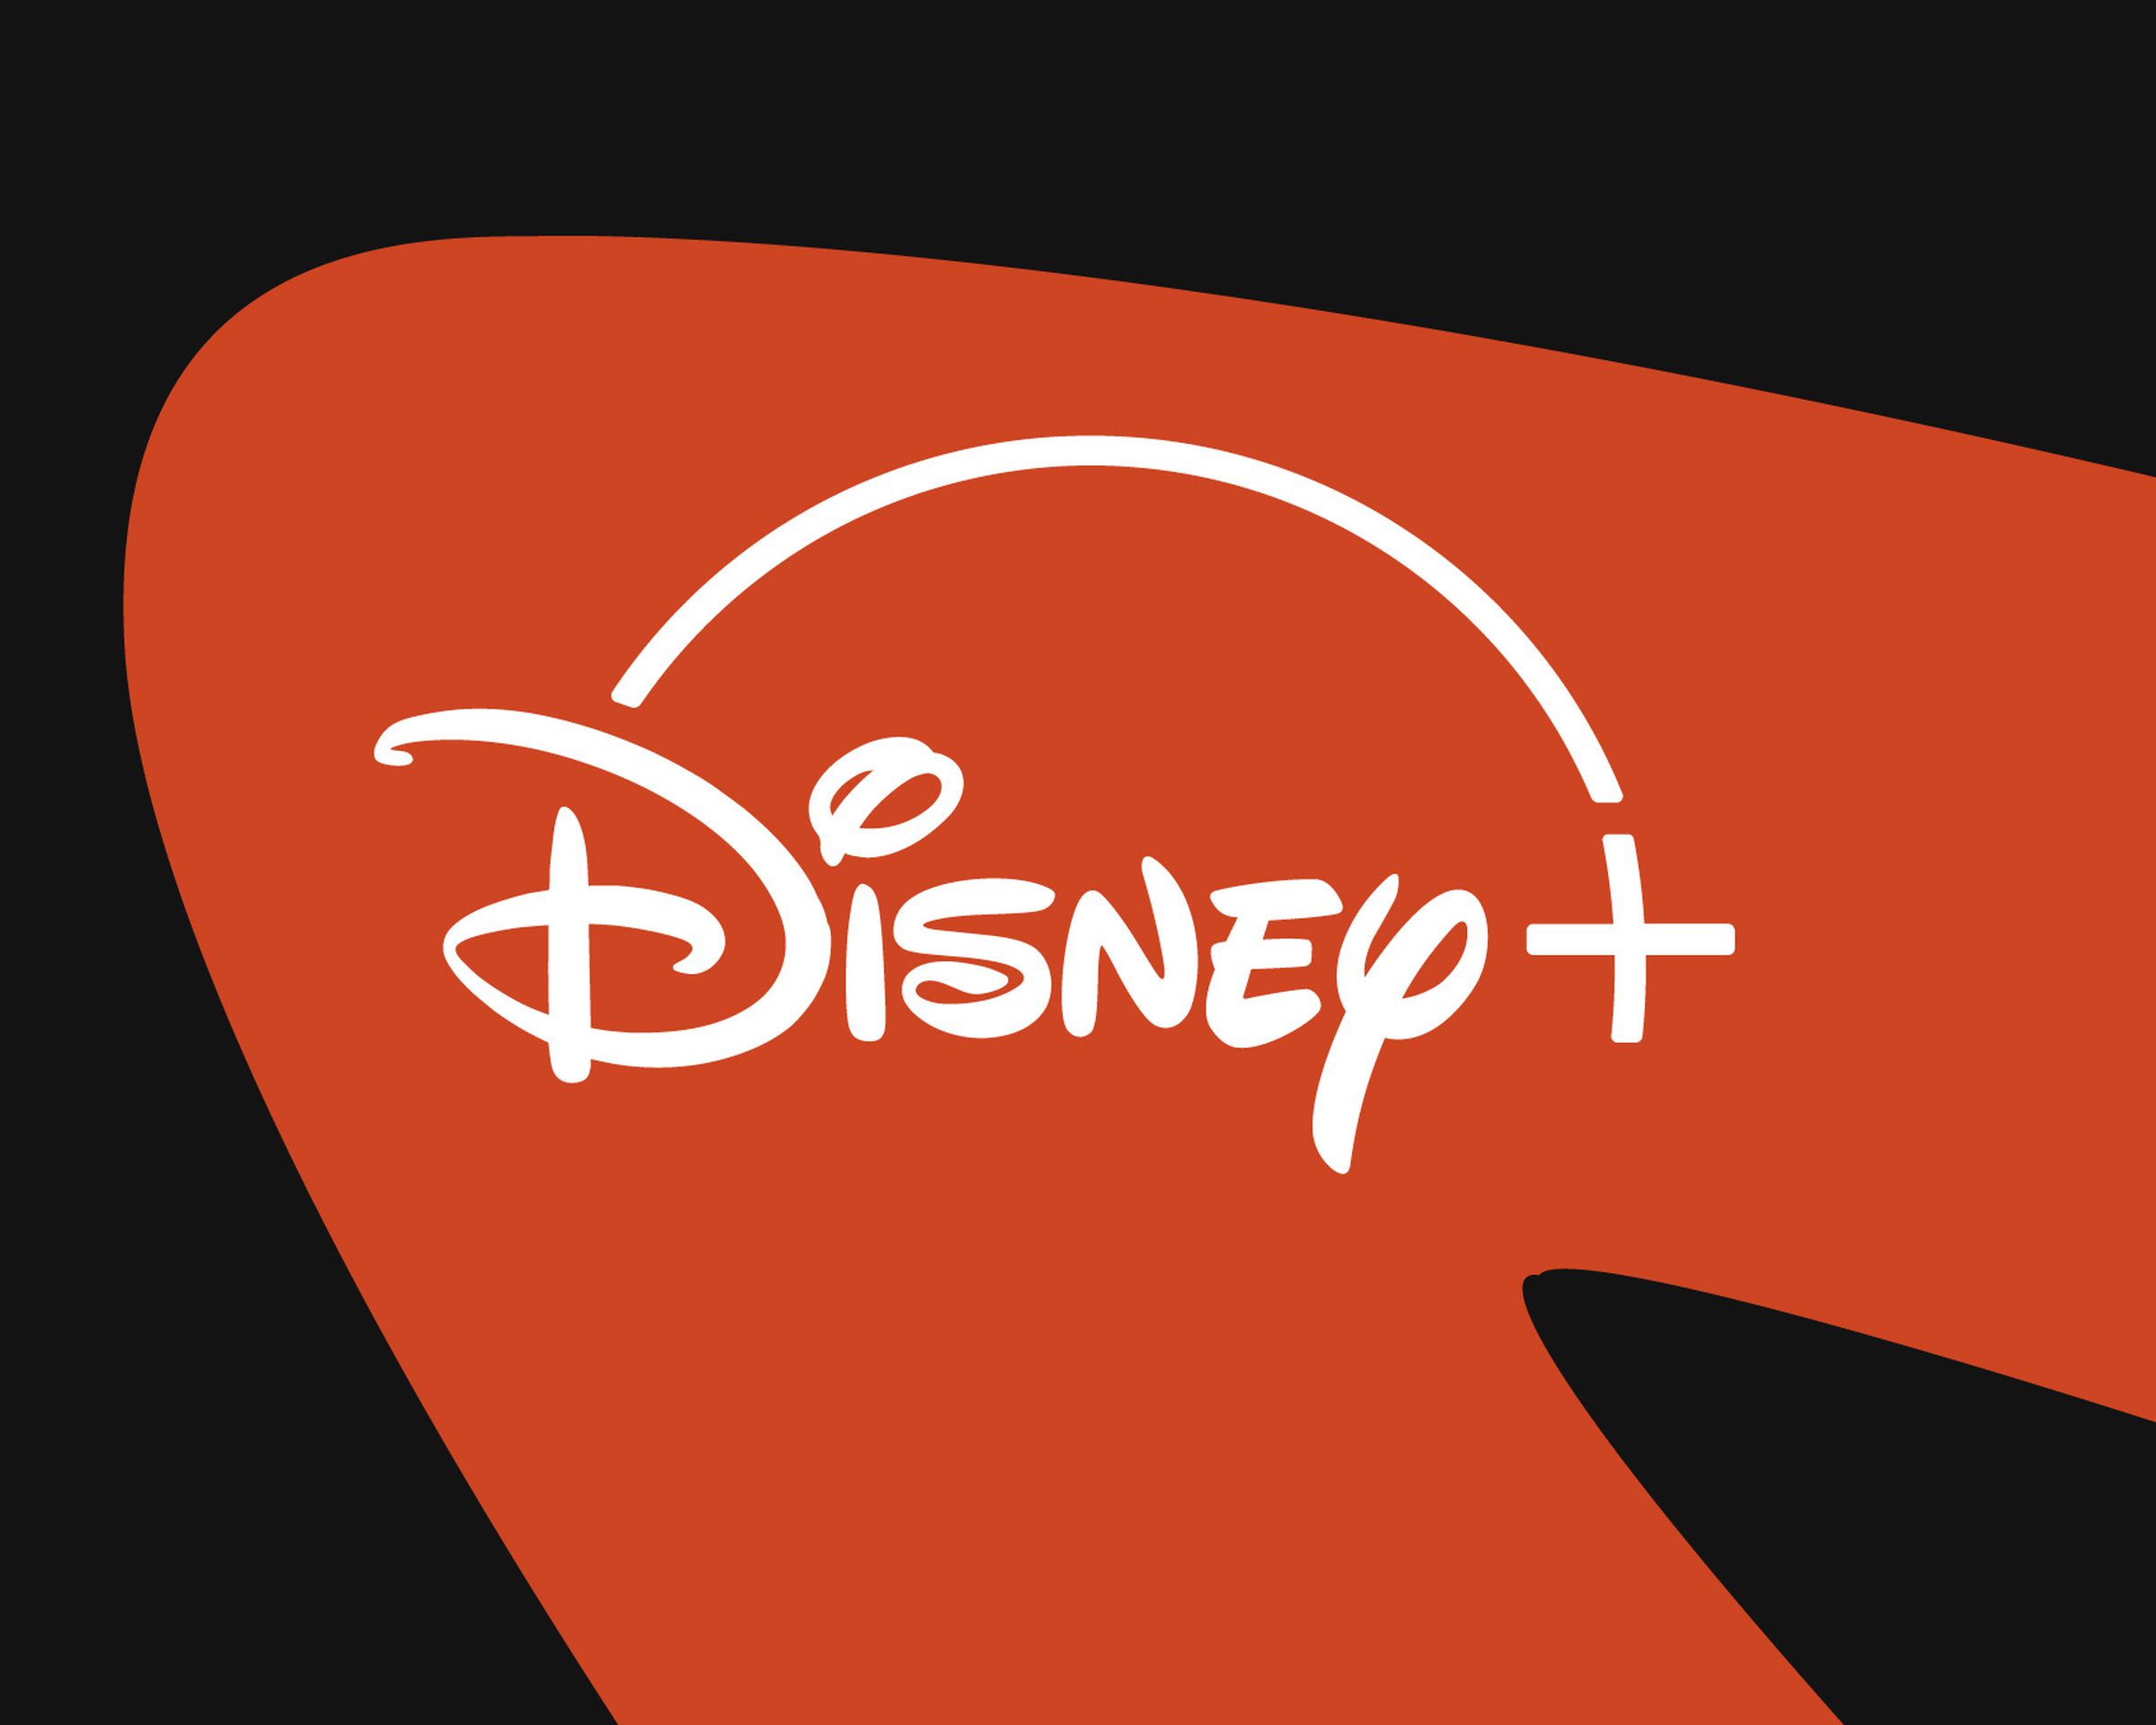 Disney Plus logo on a black and red background.